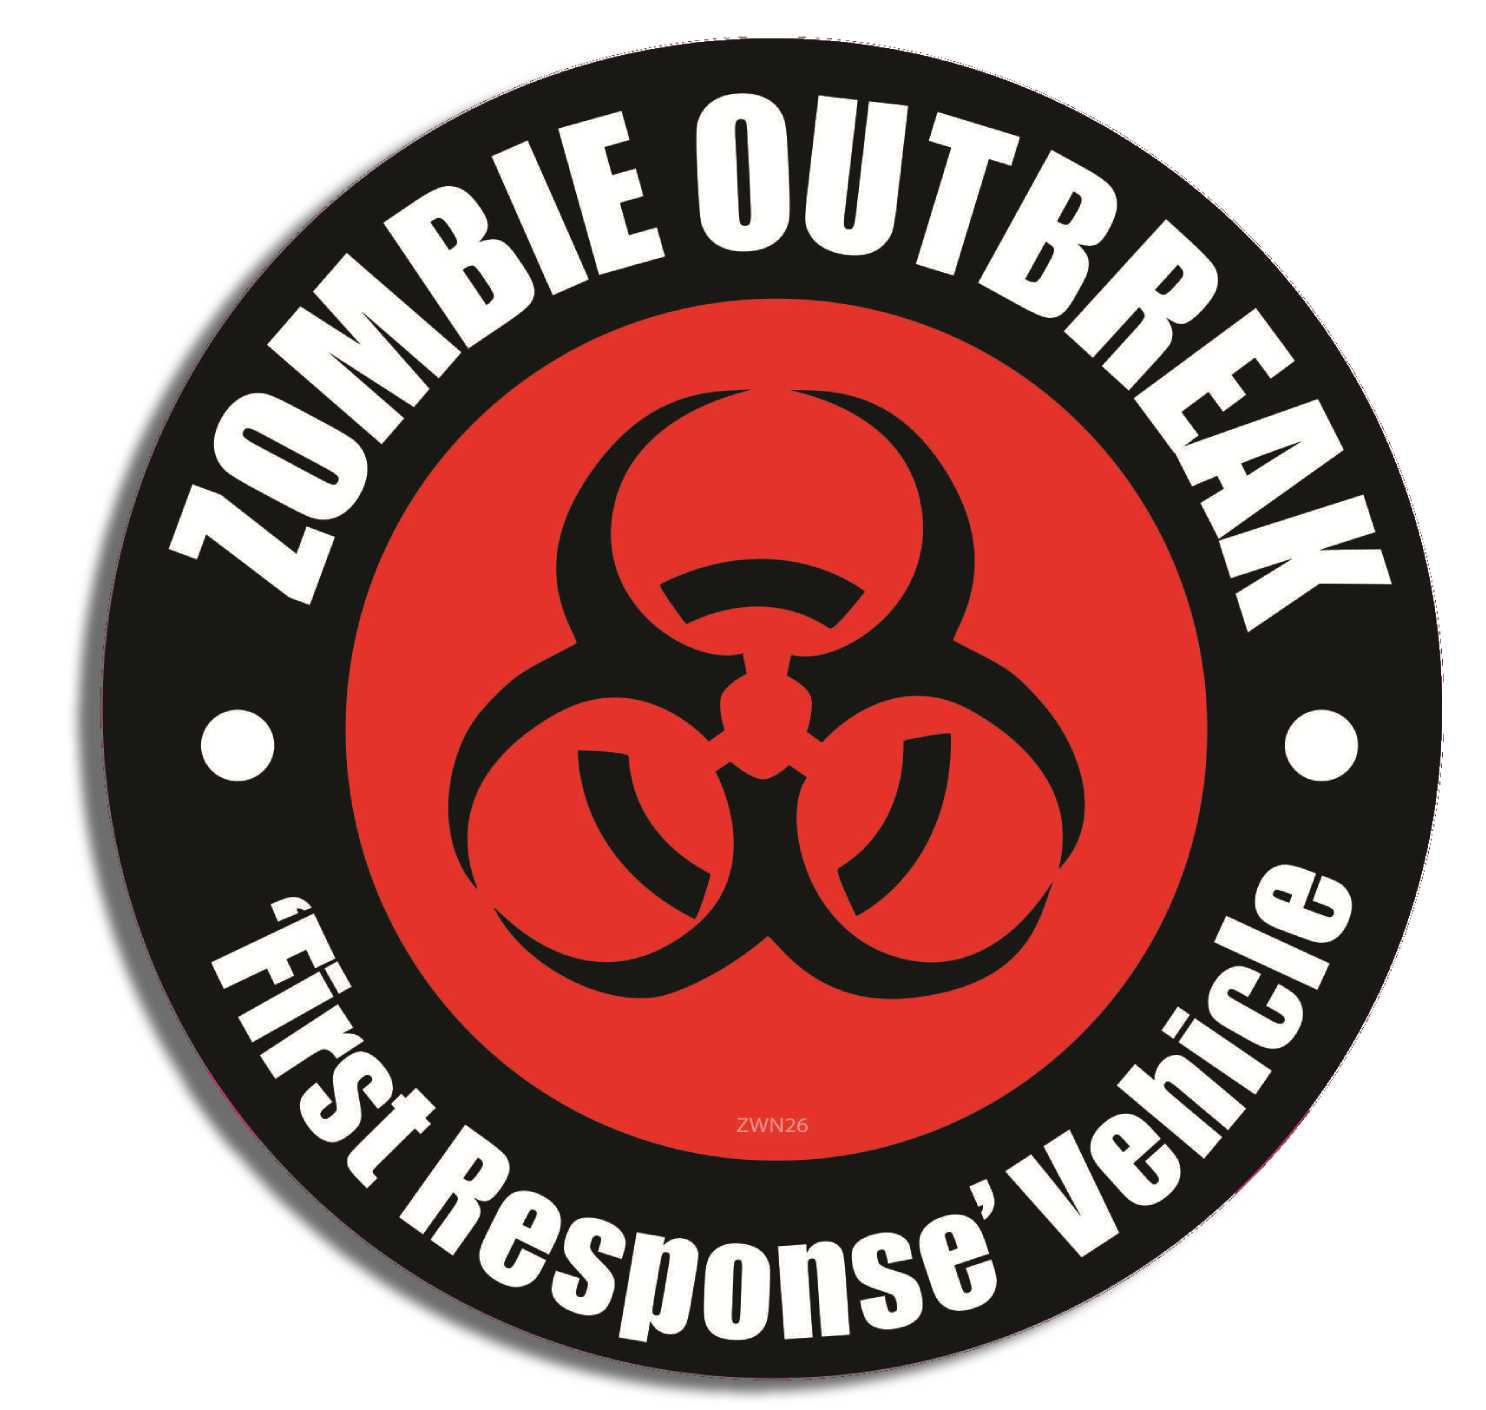 Zombie Outbreak First Response Vehicle - 5" x 5" Bumper Sticker- -  Decal Bumper Sticker-zombie Bumper Sticker Car Magnet Zombie Outbreak First Response Vehicle-  Decal for carswalking dead, zombies